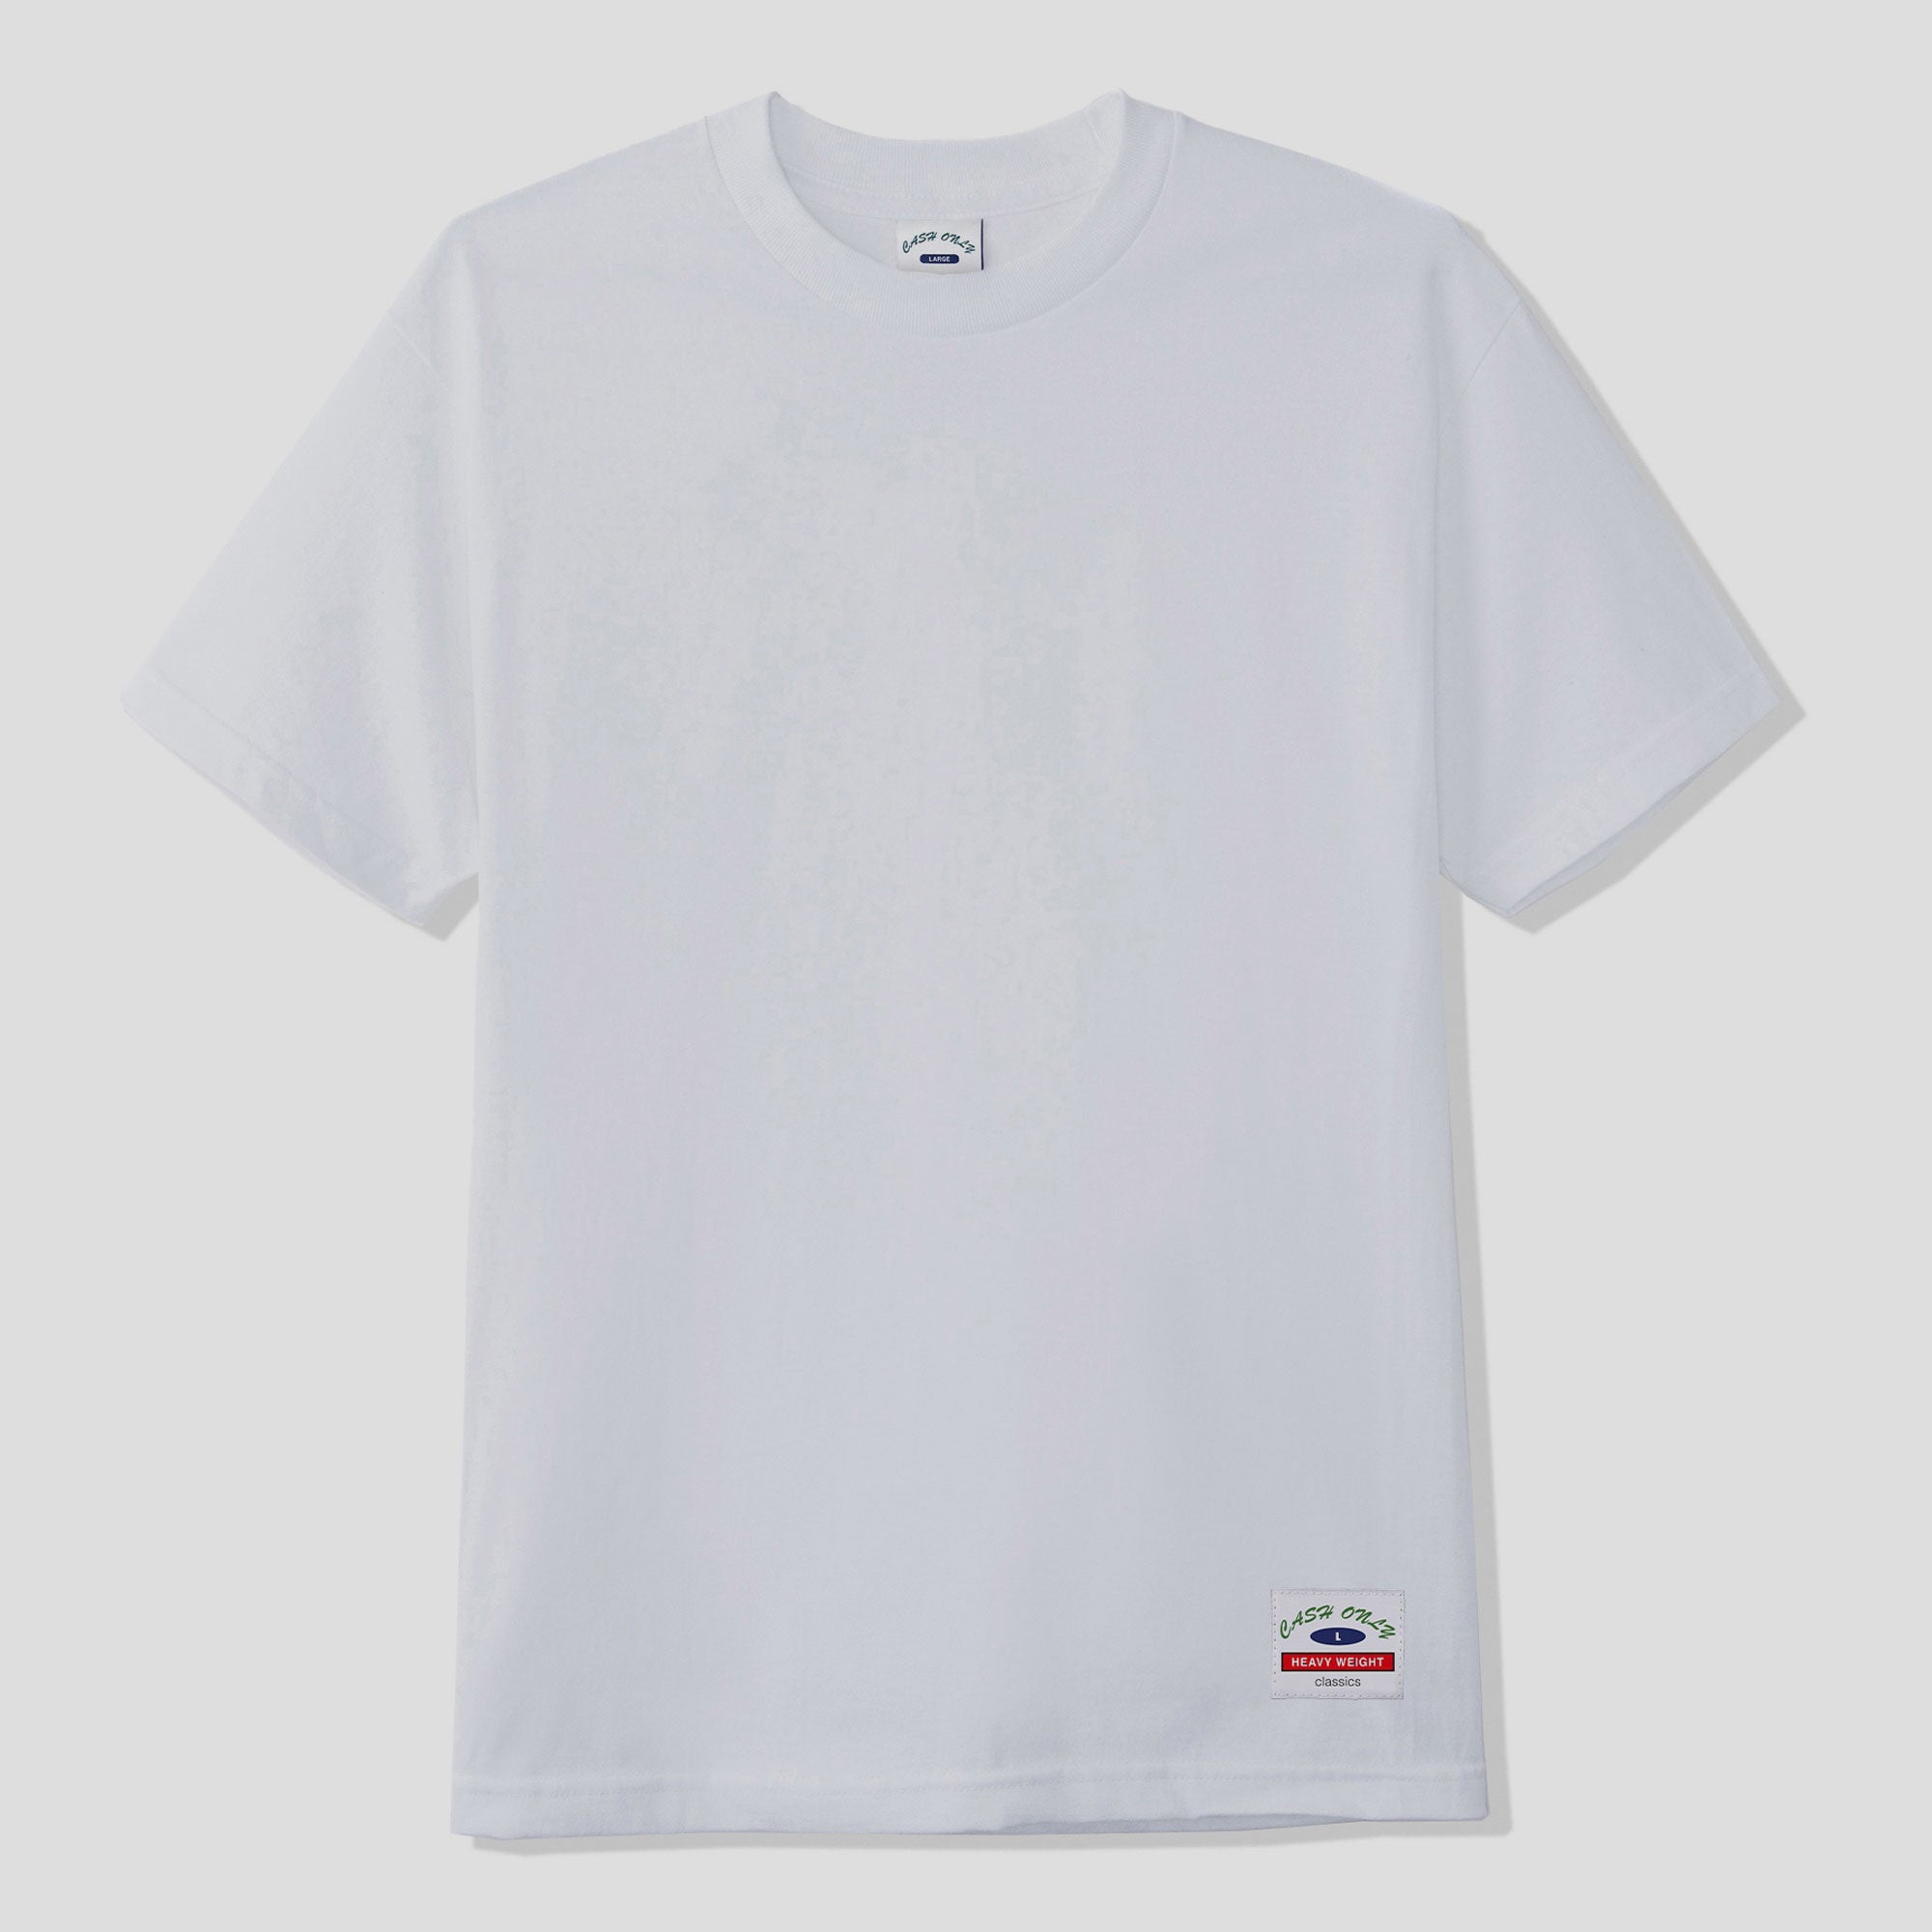 Cash Only Ultra Heavy-Weight Basic Tee - White